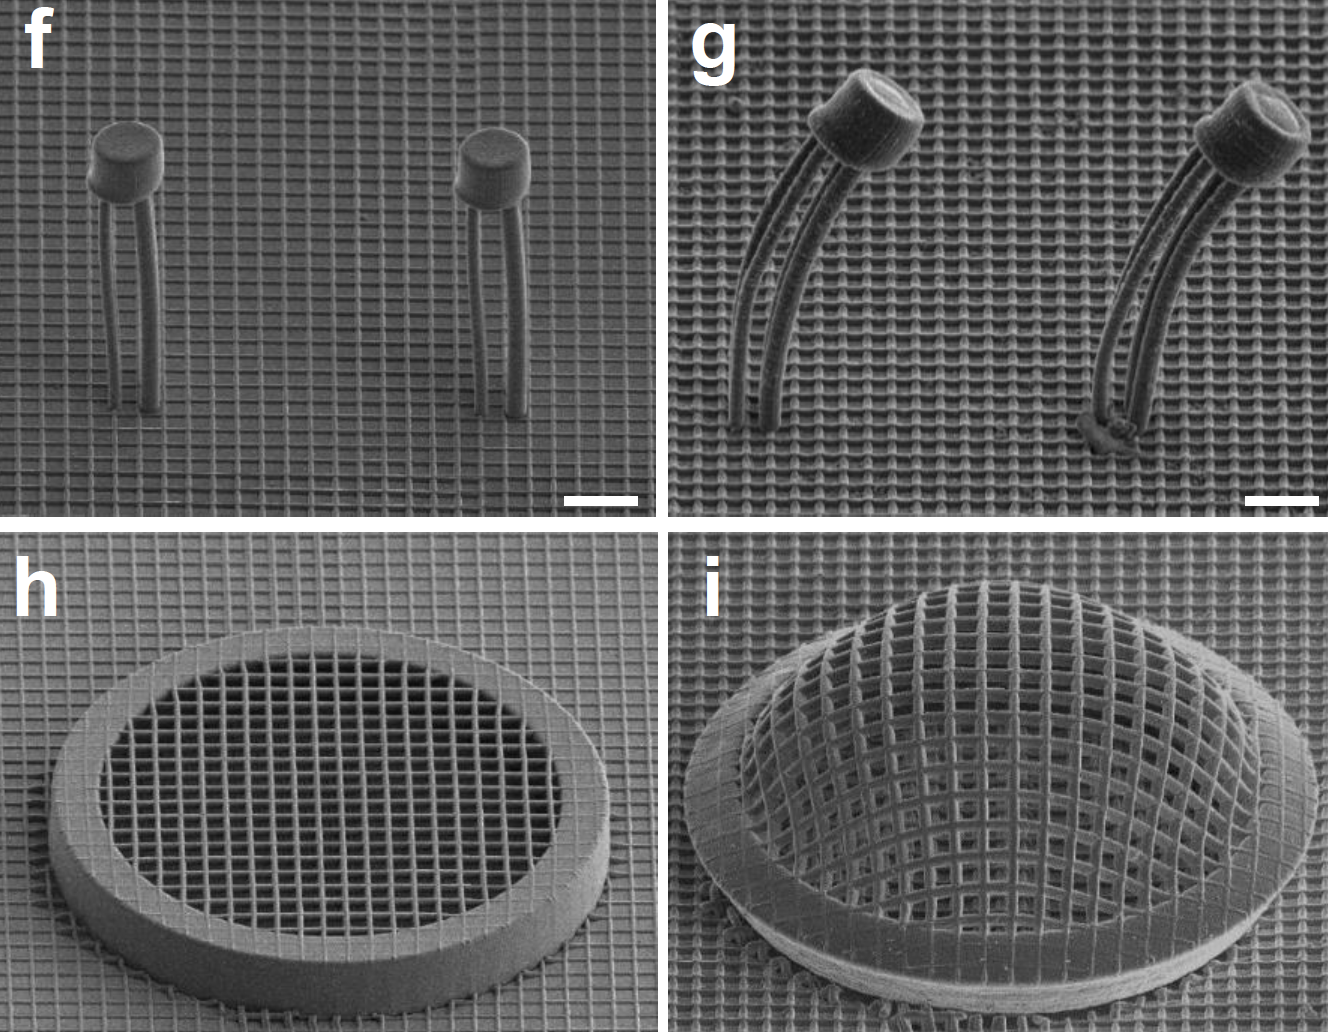 Structures in a new architected material change shape when a very low current is applied. Left is before current is applied, right is after. Credit: CalTech